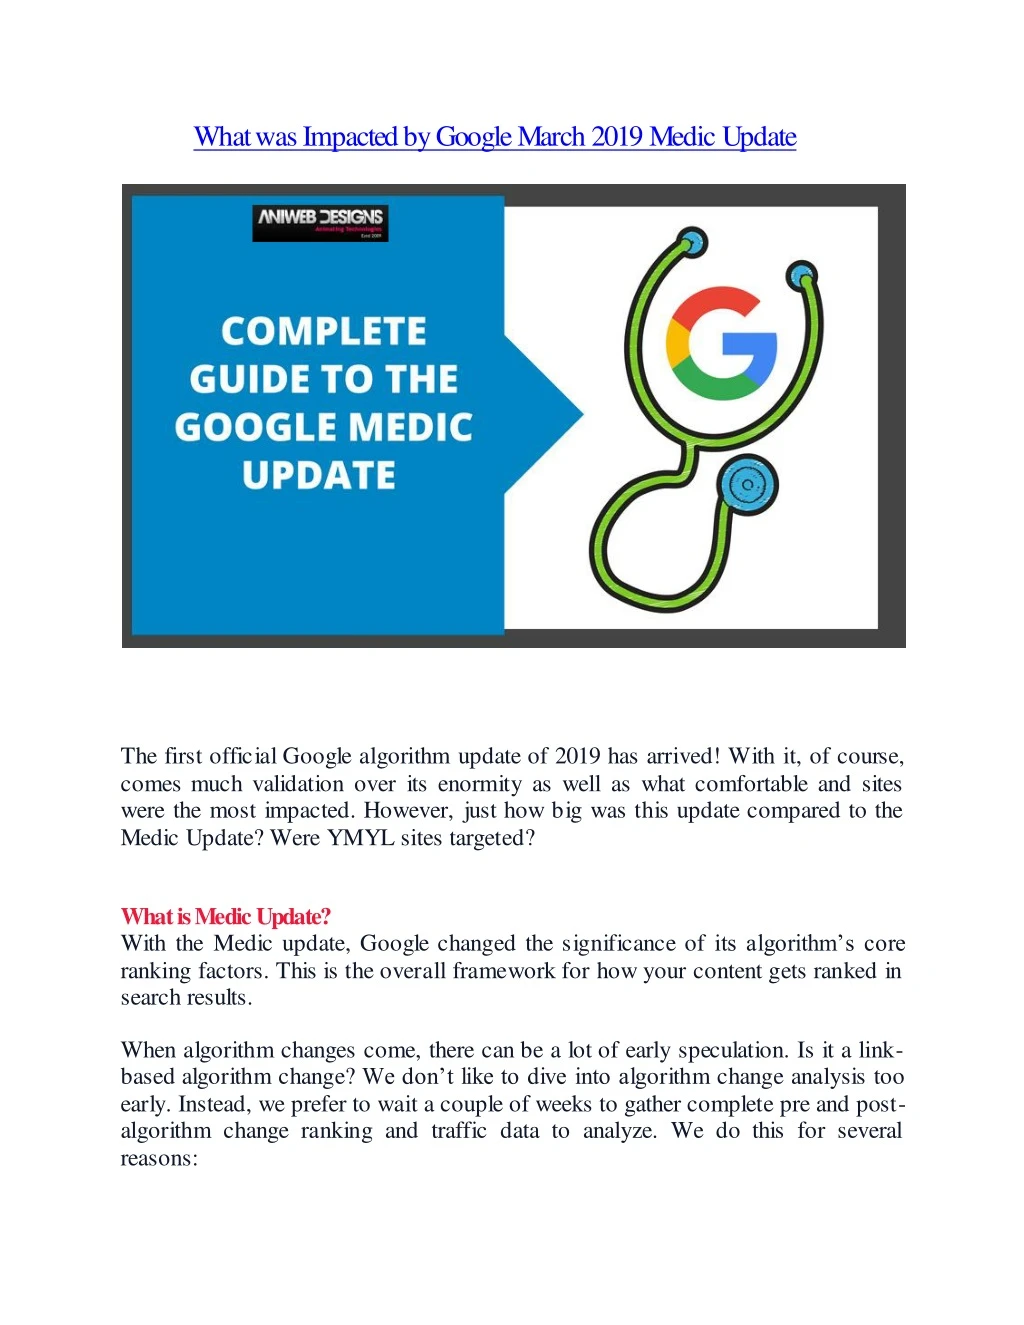 what was impacted by google march 2019 medic